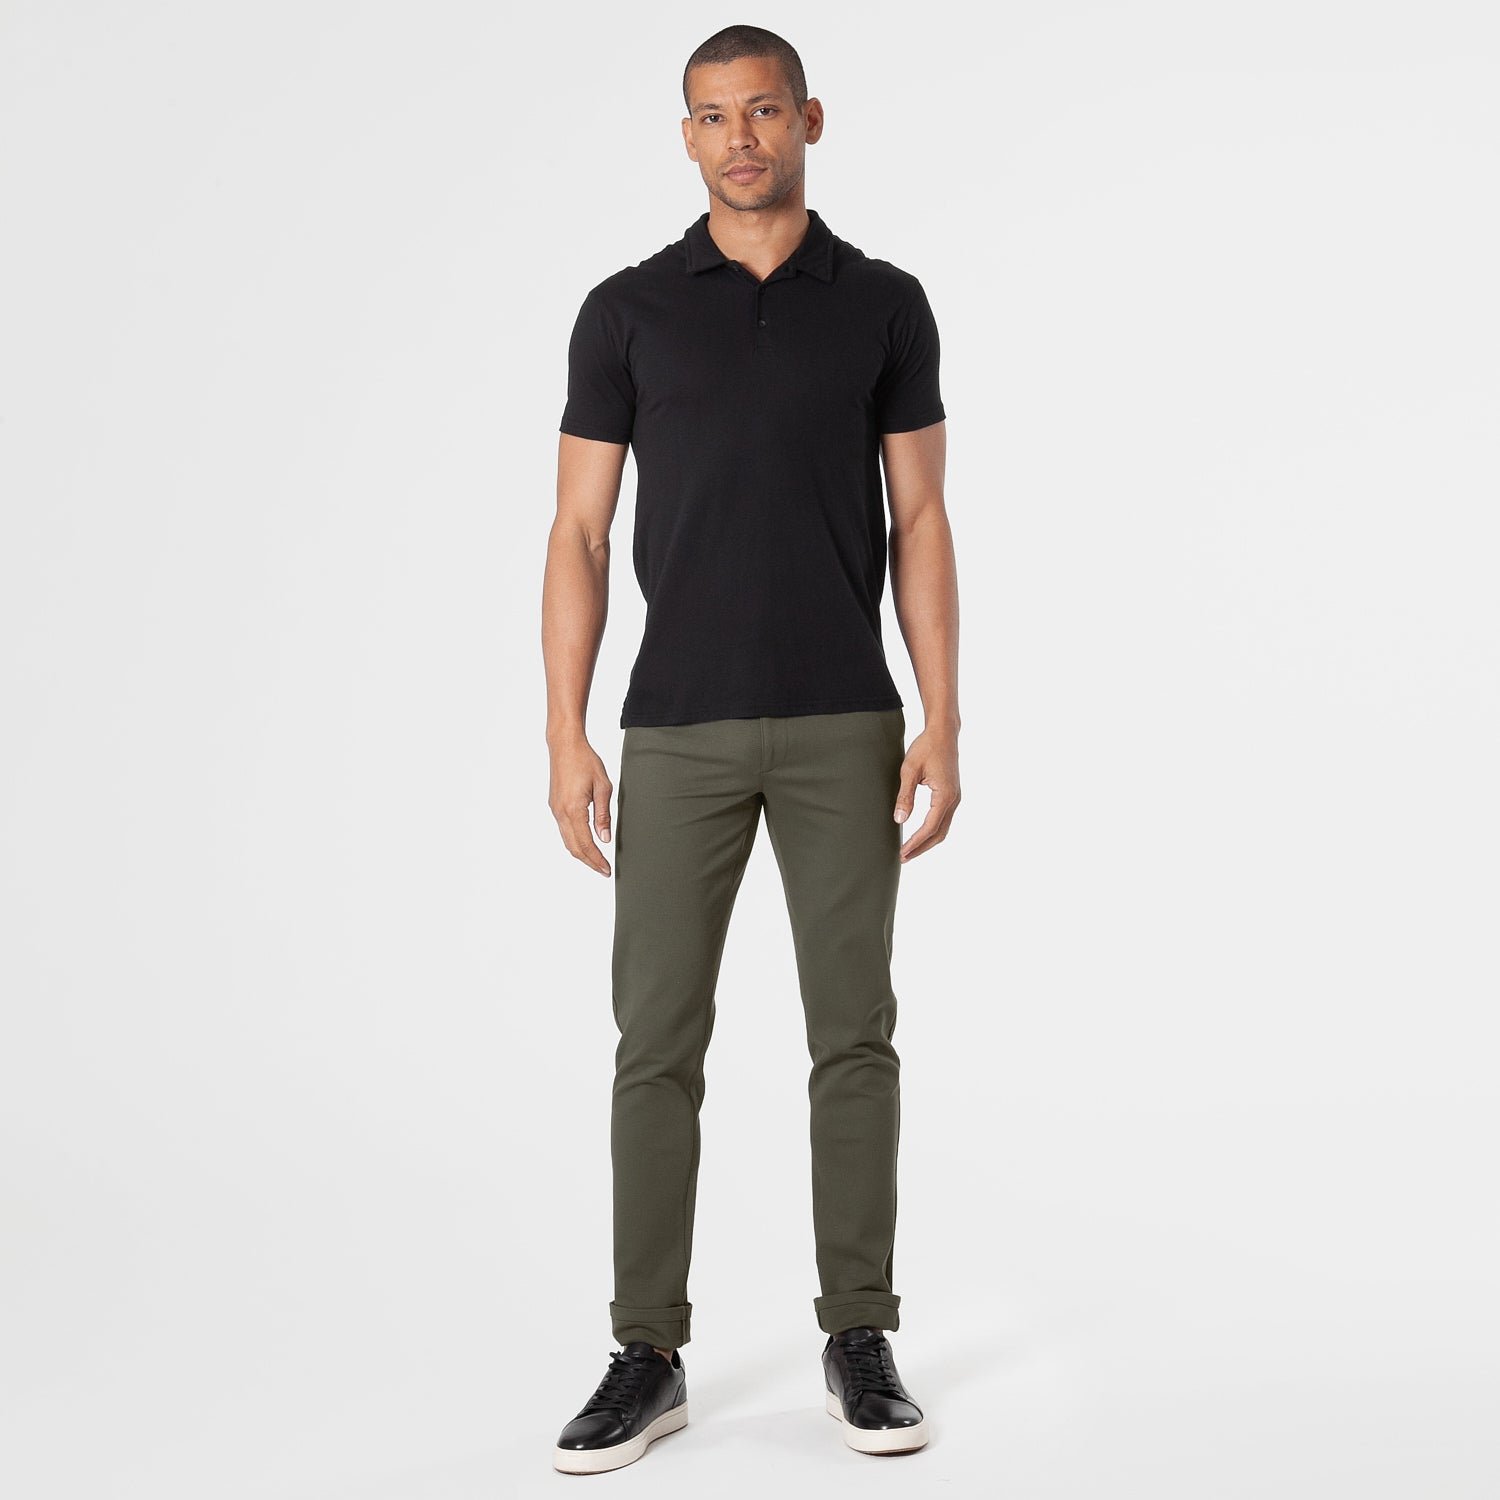 Military Green and Navy Chino Pants 2-Pack